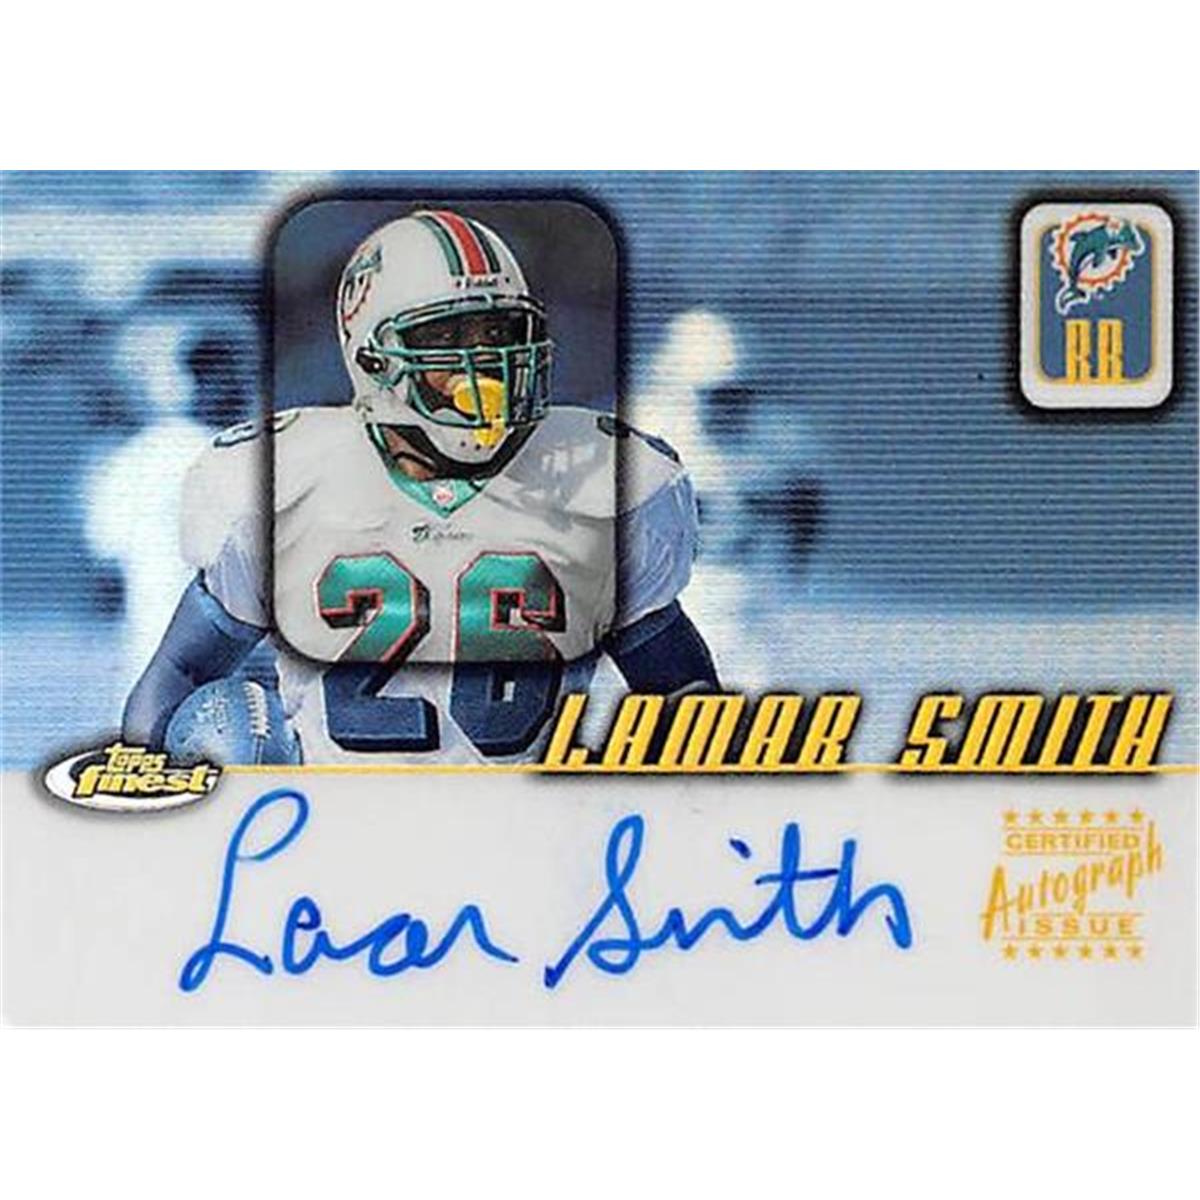 Picture of Autograph Warehouse 366600 Lamar Smith Autographed Football Card - 2001 Topps Finest FALS Rookie